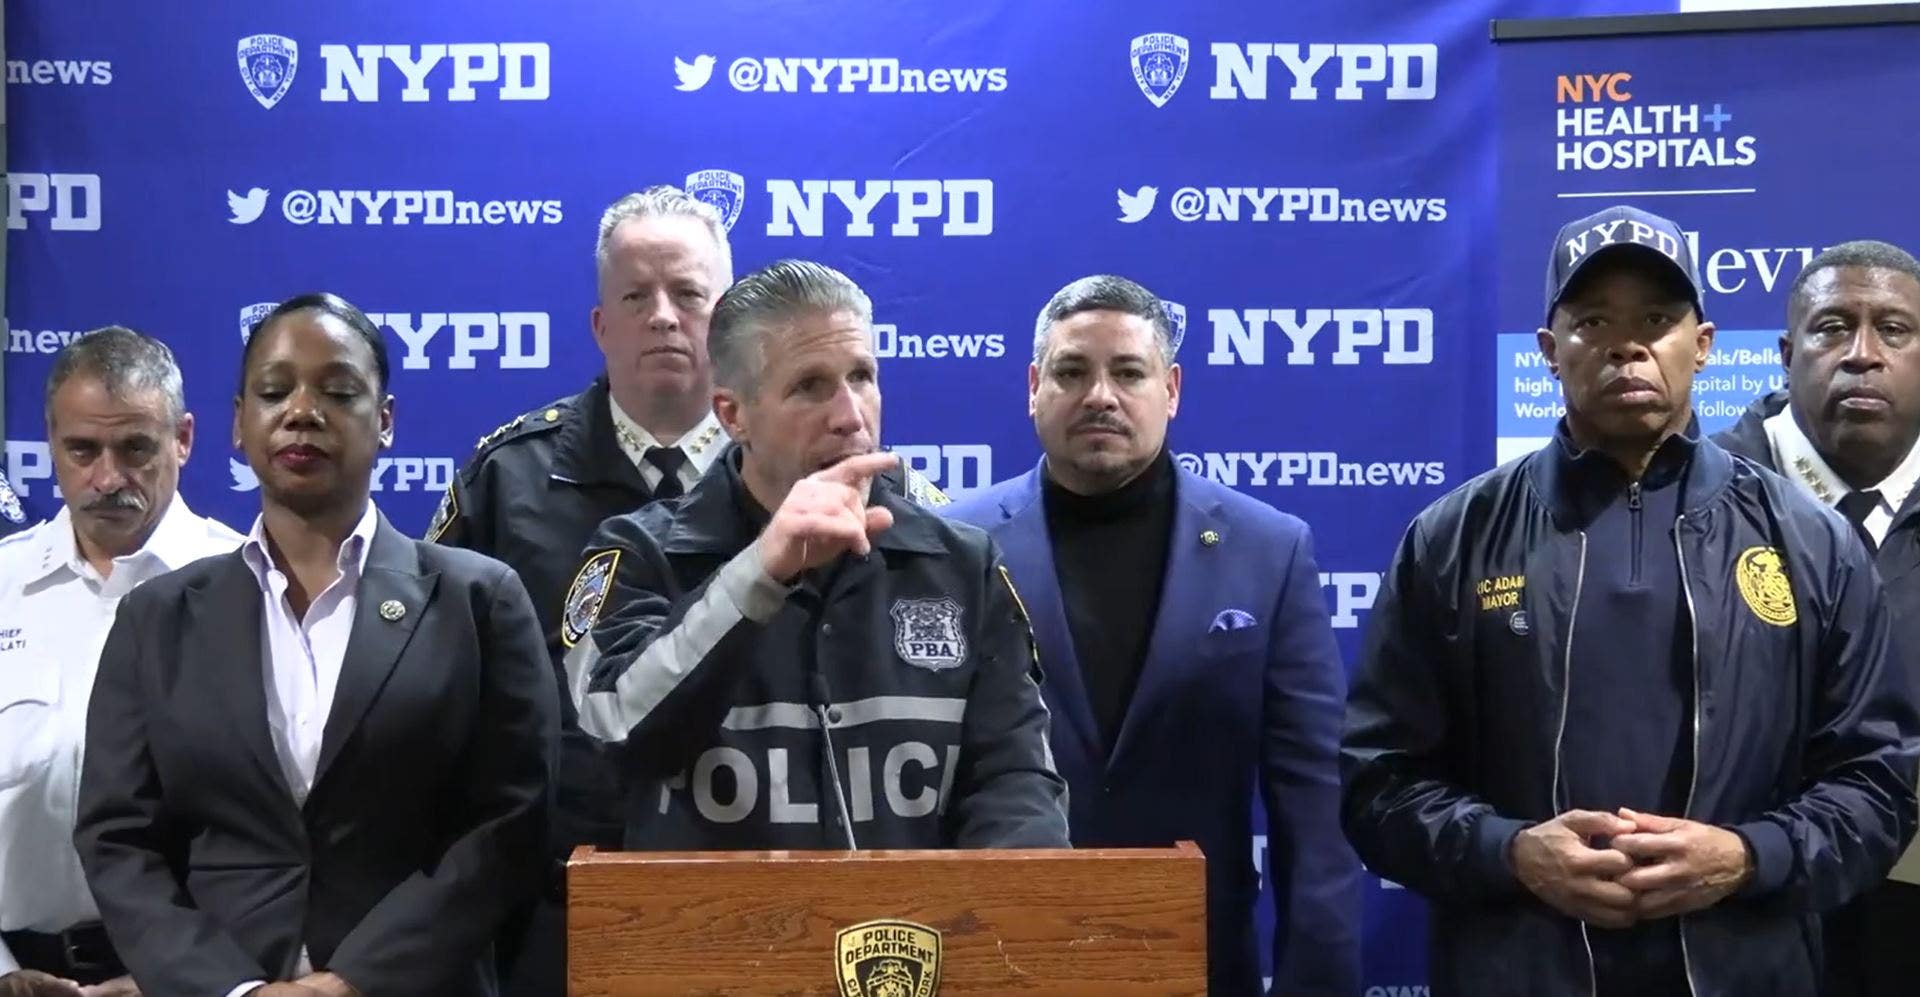 Suspect in NYC police stabbing may have Islamic extremist ties: report